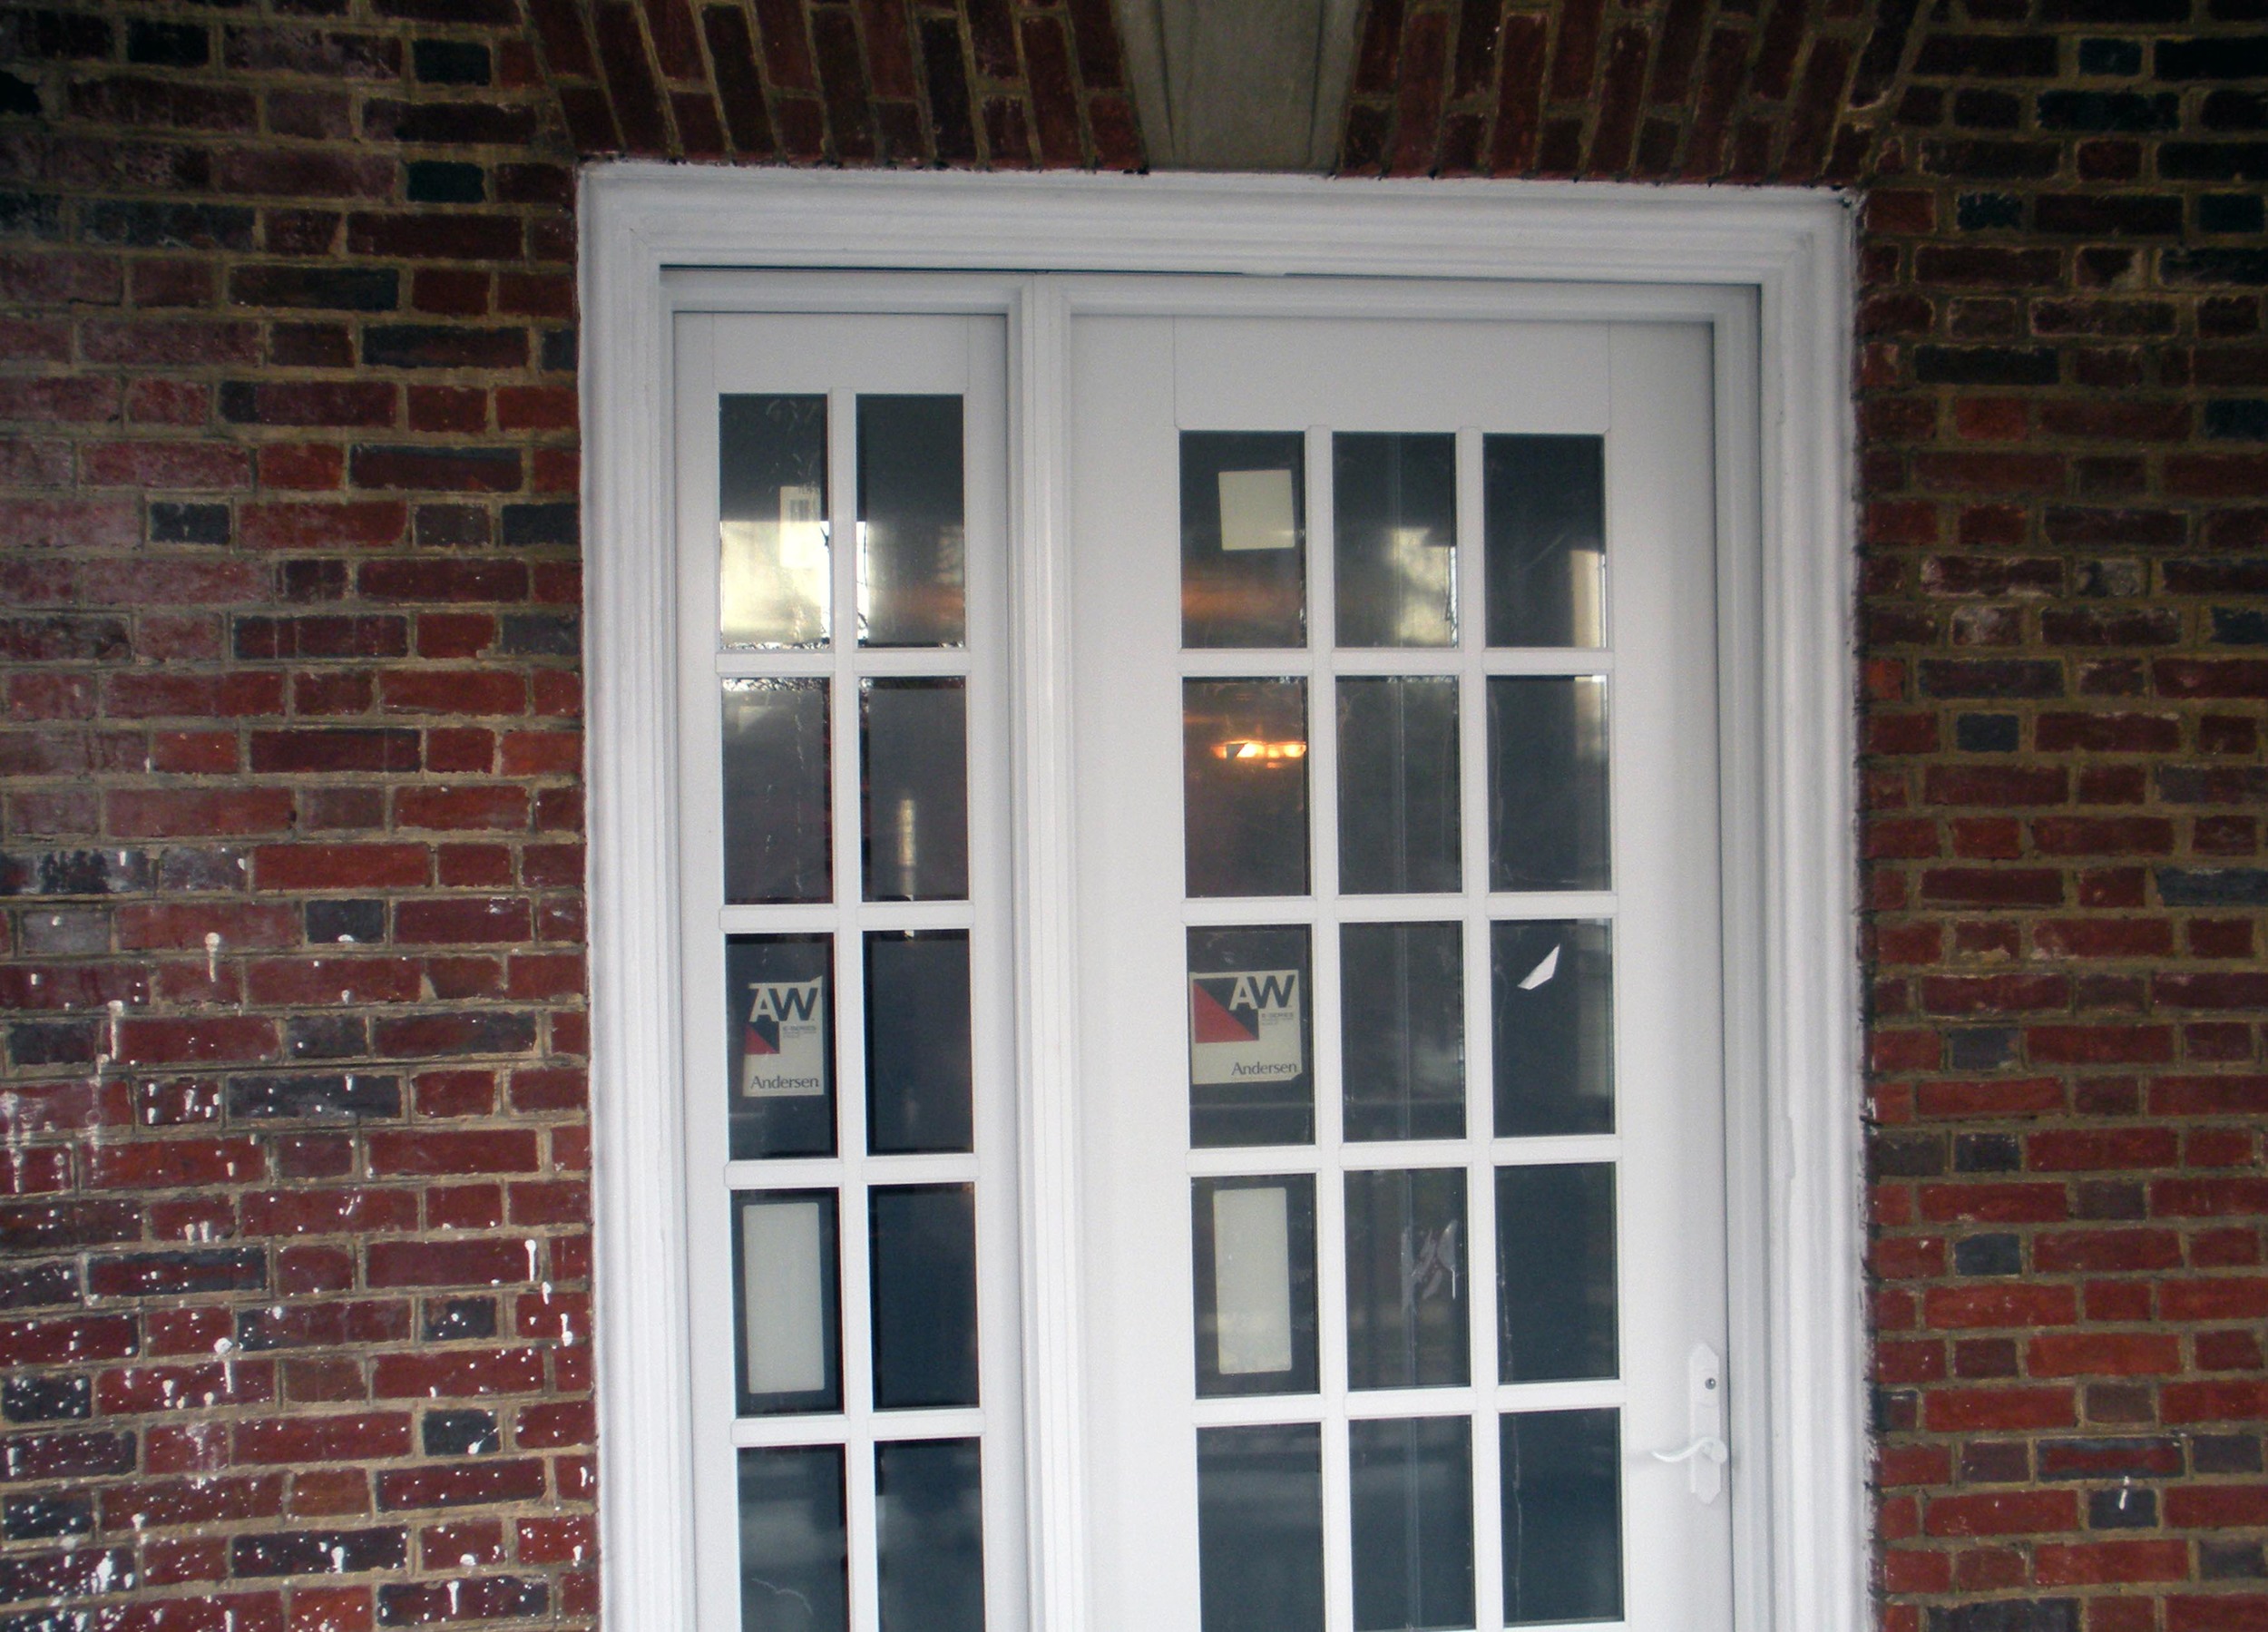  Side-Porch Repair Project - Nov. 22, 2013
New Doors in side-porch 